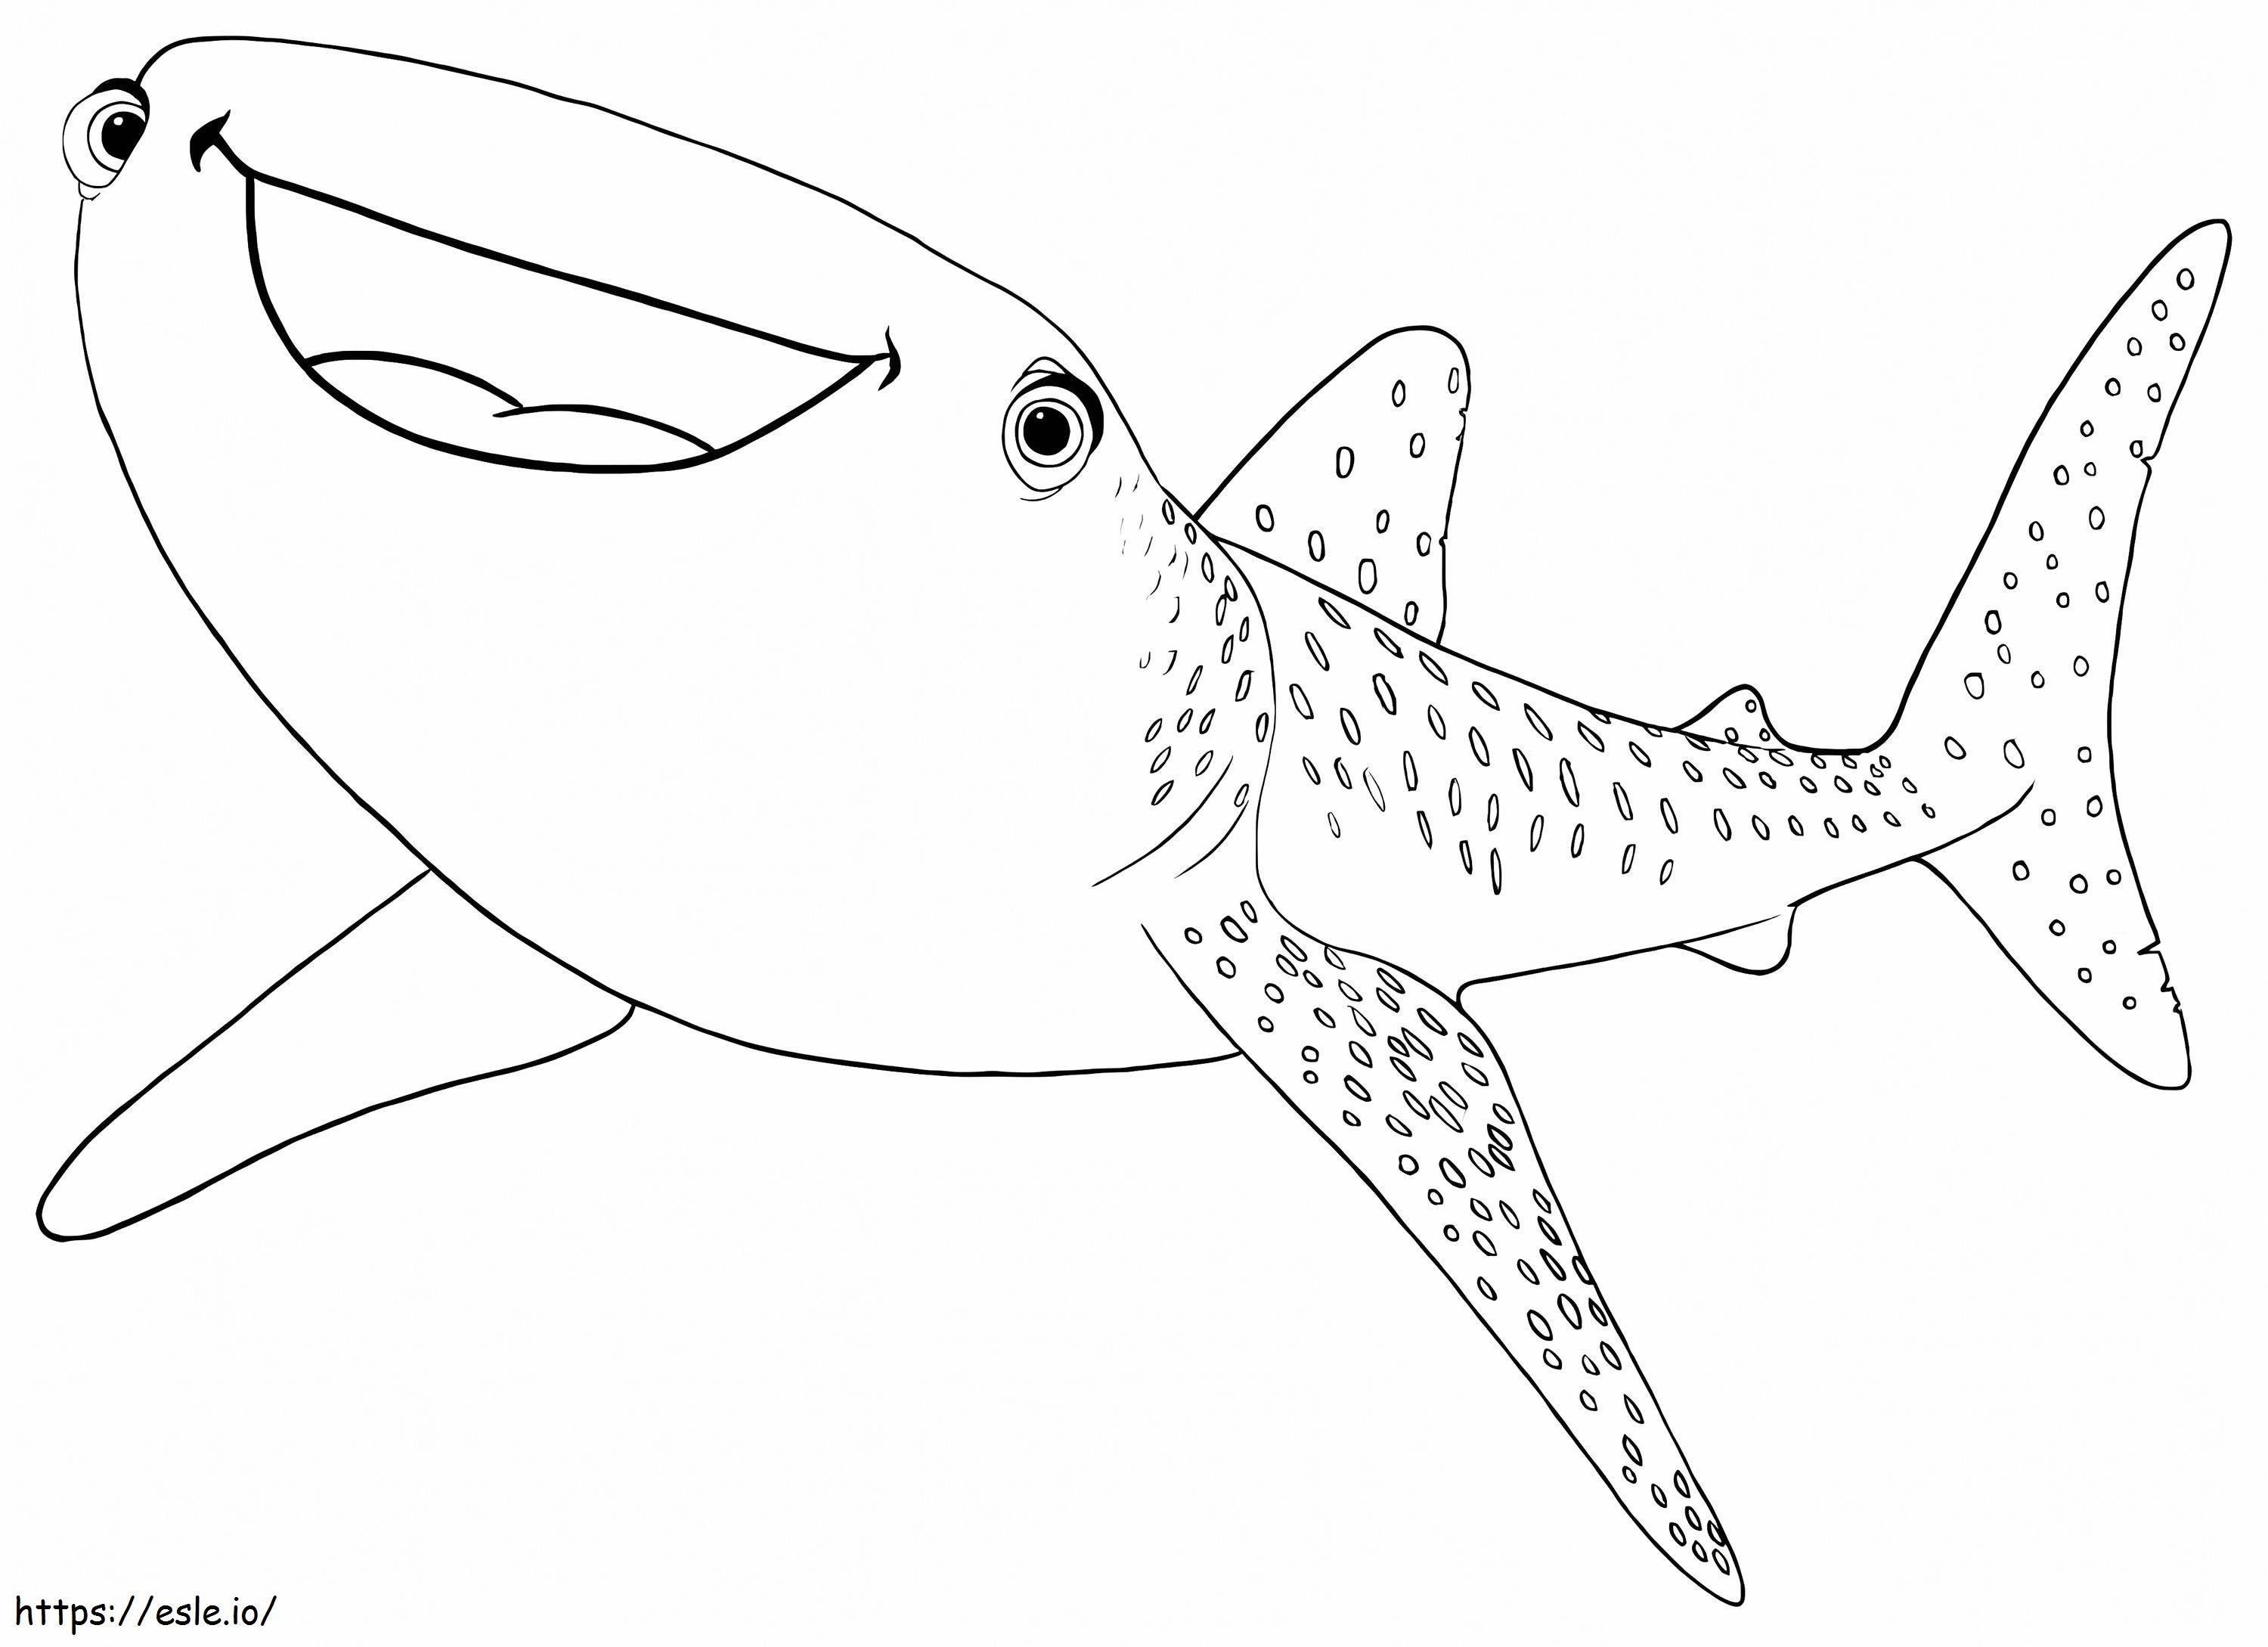 Laughing Shark coloring page